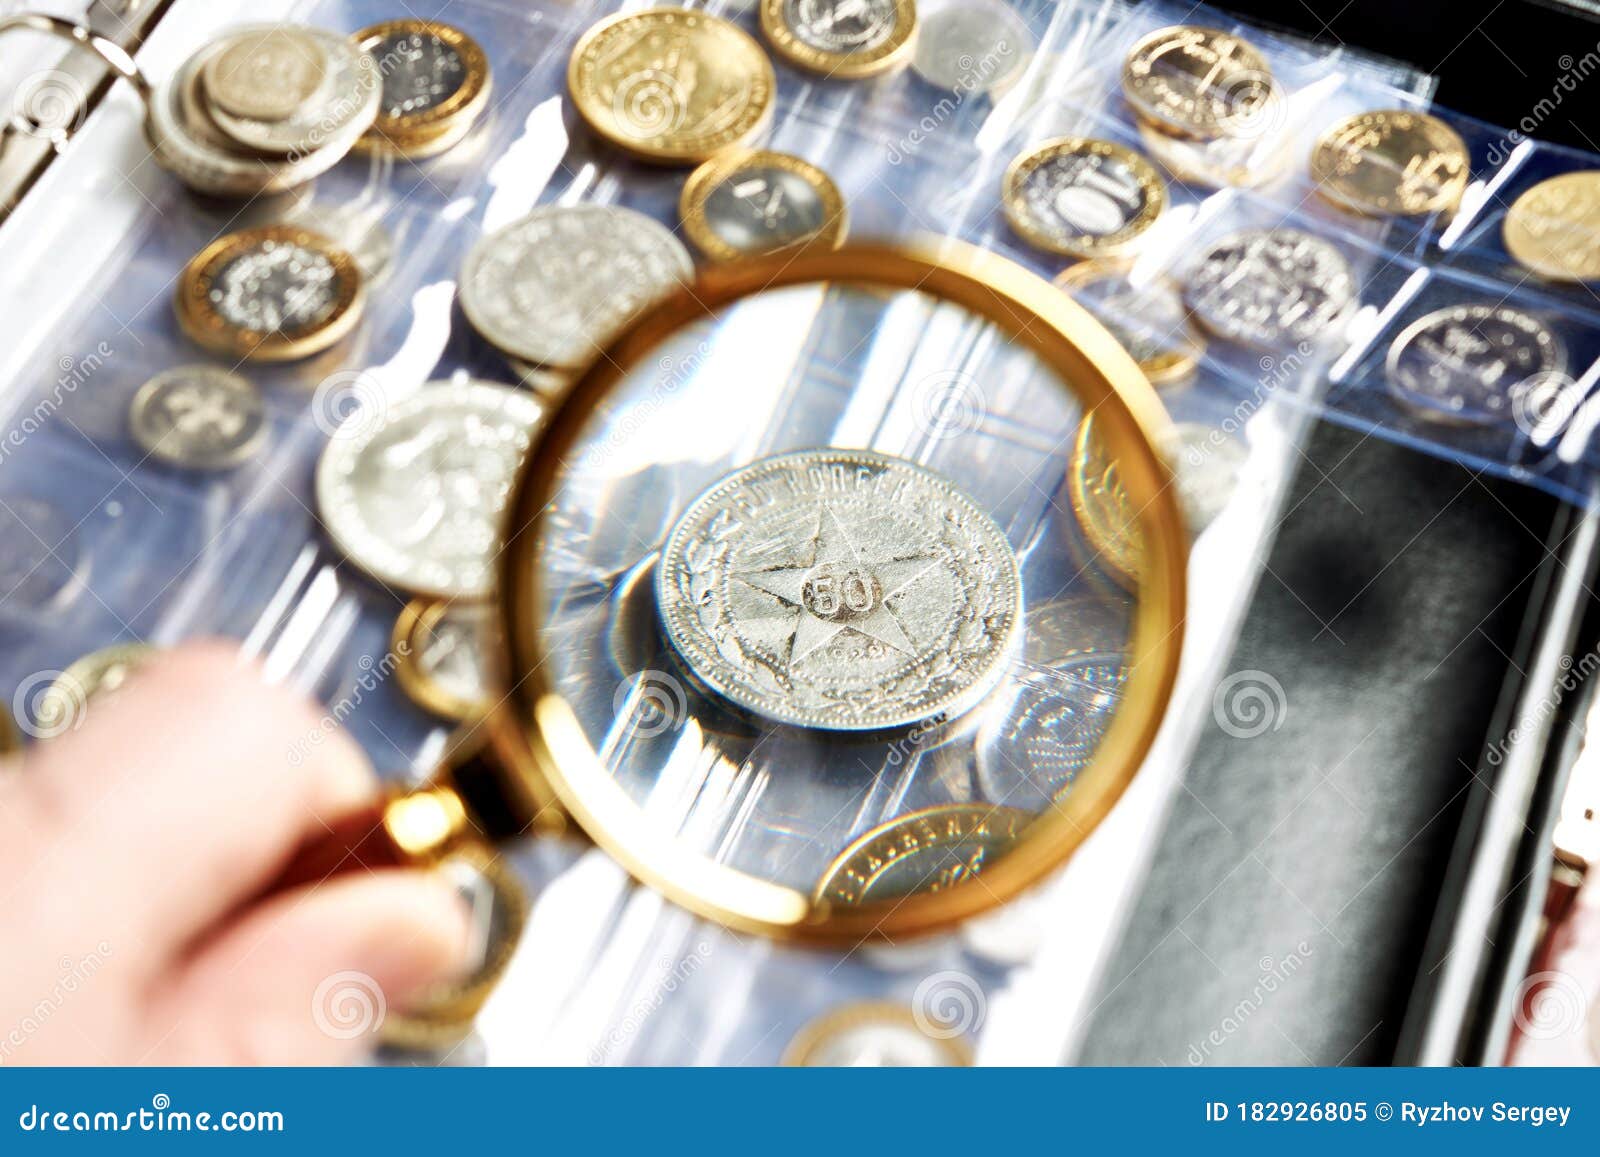 old numismatics silver coins with magnifying glass